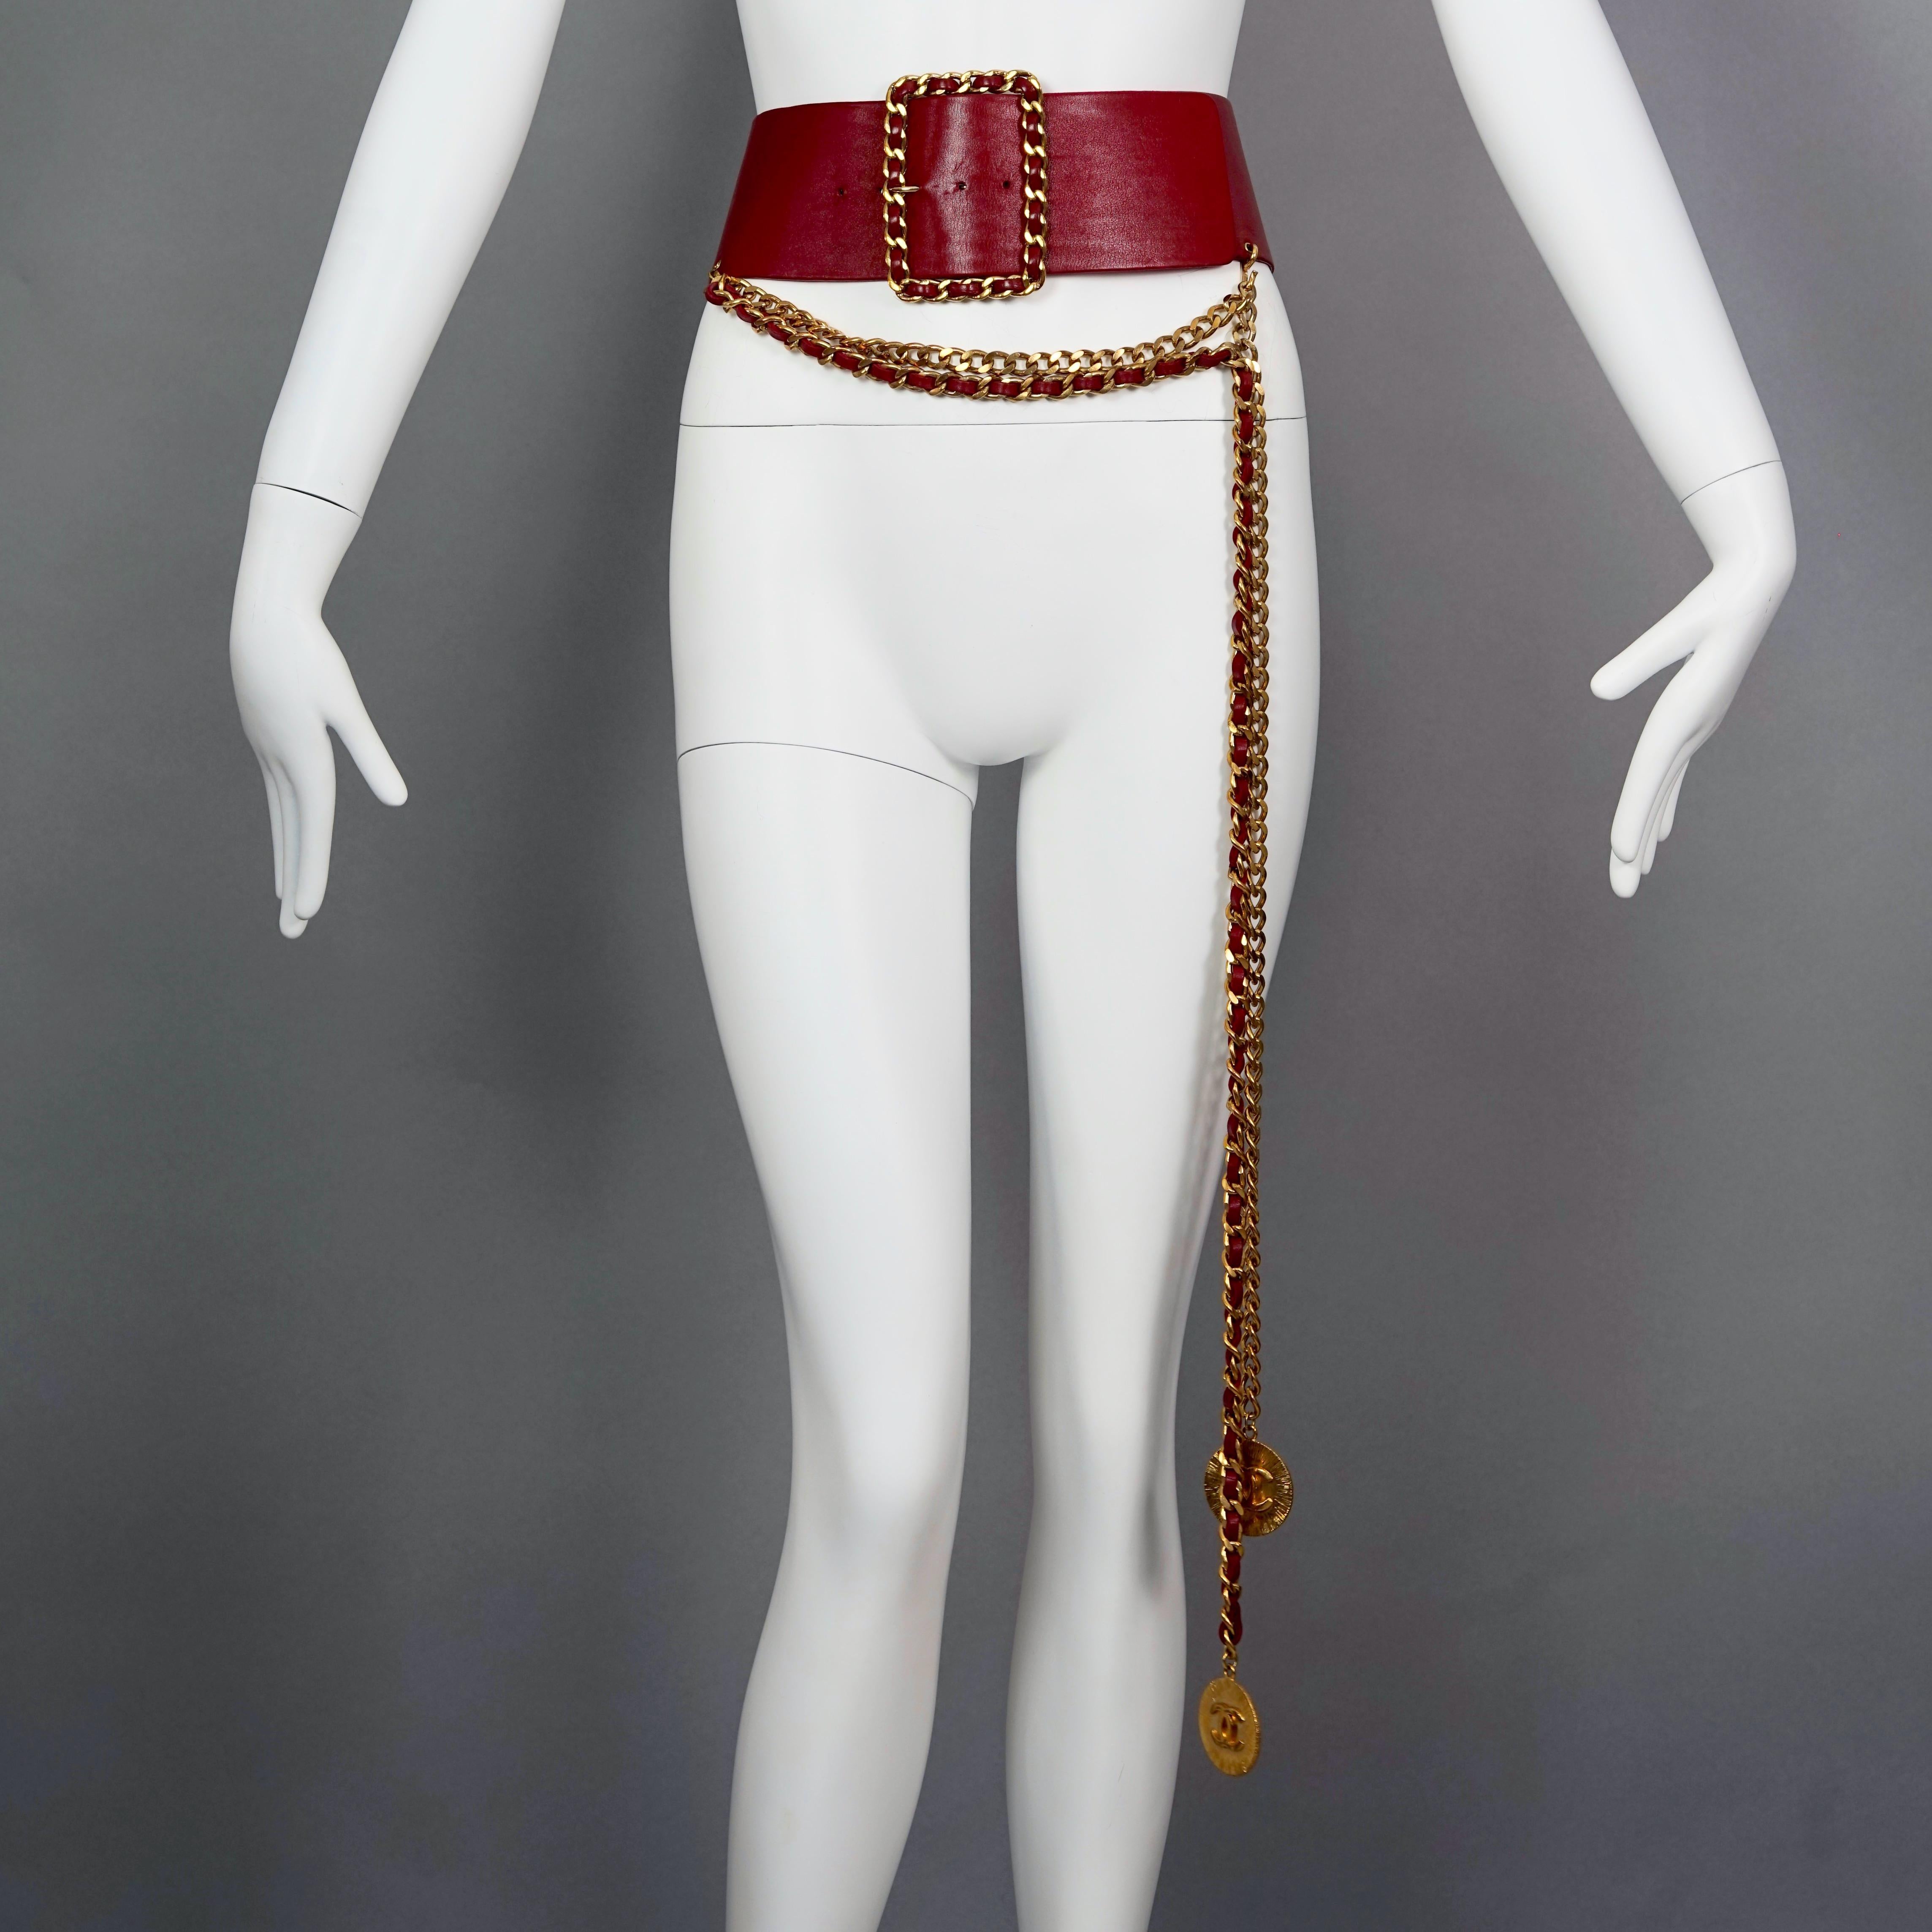 Vintage CHANEL Claudia Schiffer Wide Long Chain Medallion Red Leather Belt
As seen on Claudia Schiffer from the Spring/ Summer 1992 Chanel Campaign.

Measurements:
Will Fit Waists: 27.55 inches ( 70 cm first hole) up to 30.70 inches (78 cm last